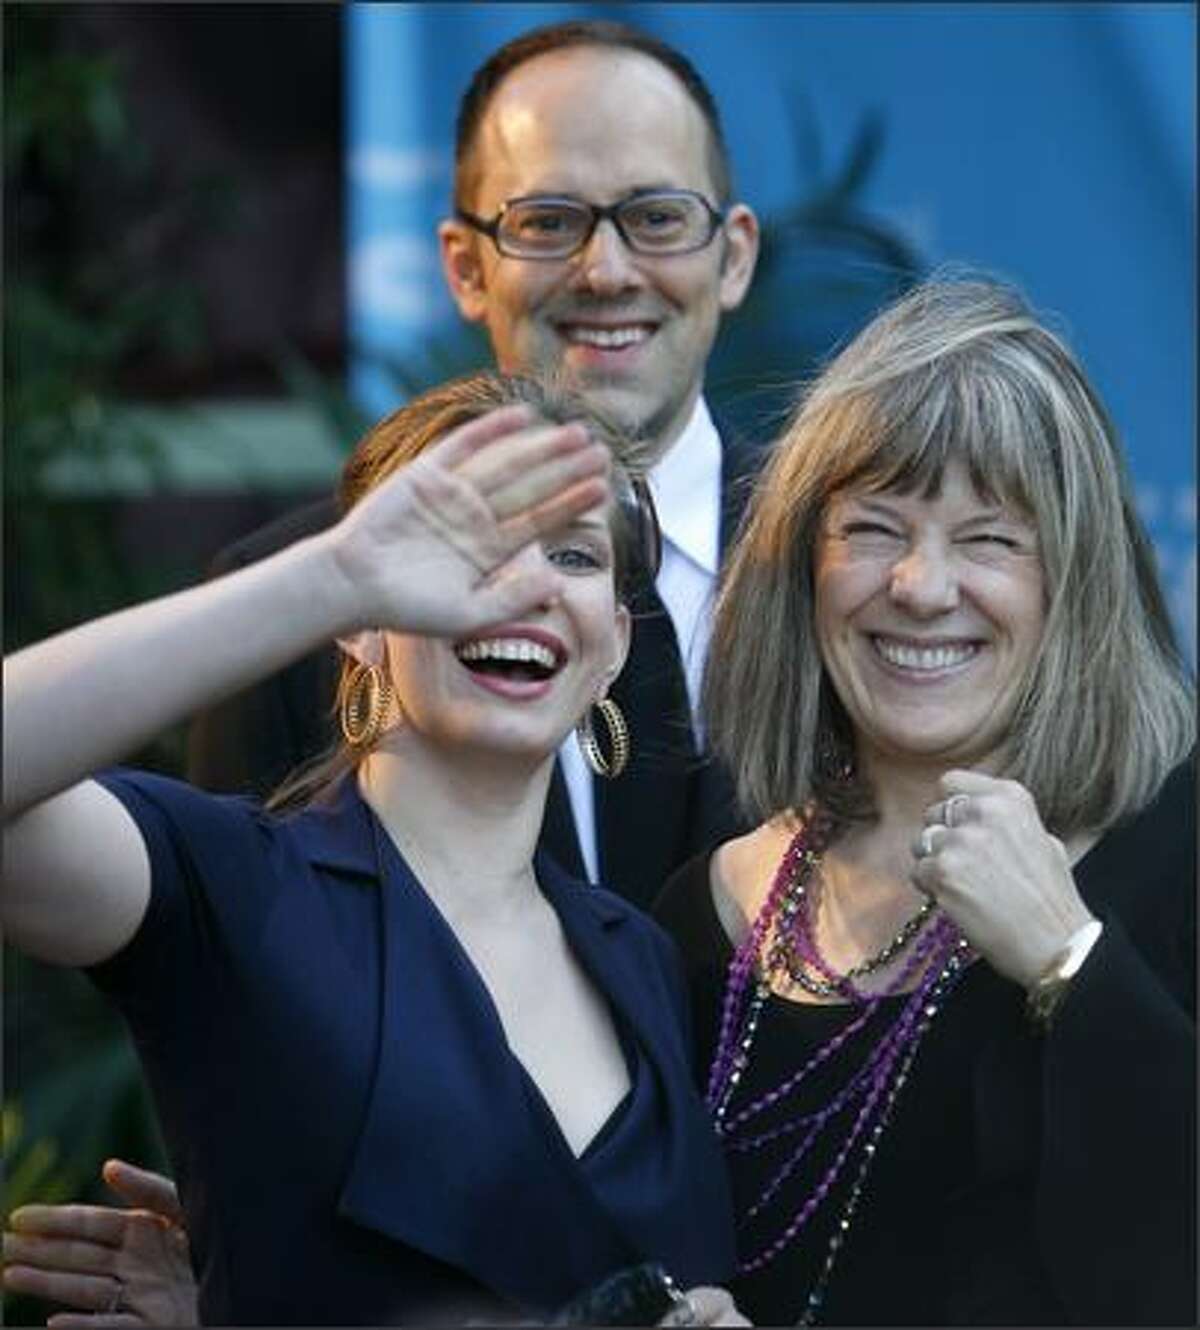 From left, Anna Chulmsky, SIFF artistic director Carl Spence and Mimi Kennedy walk the red carpet during the Seattle International Film Festival's opening show and gala party at the Paramount Theater on Thursday, May 21, 2009.